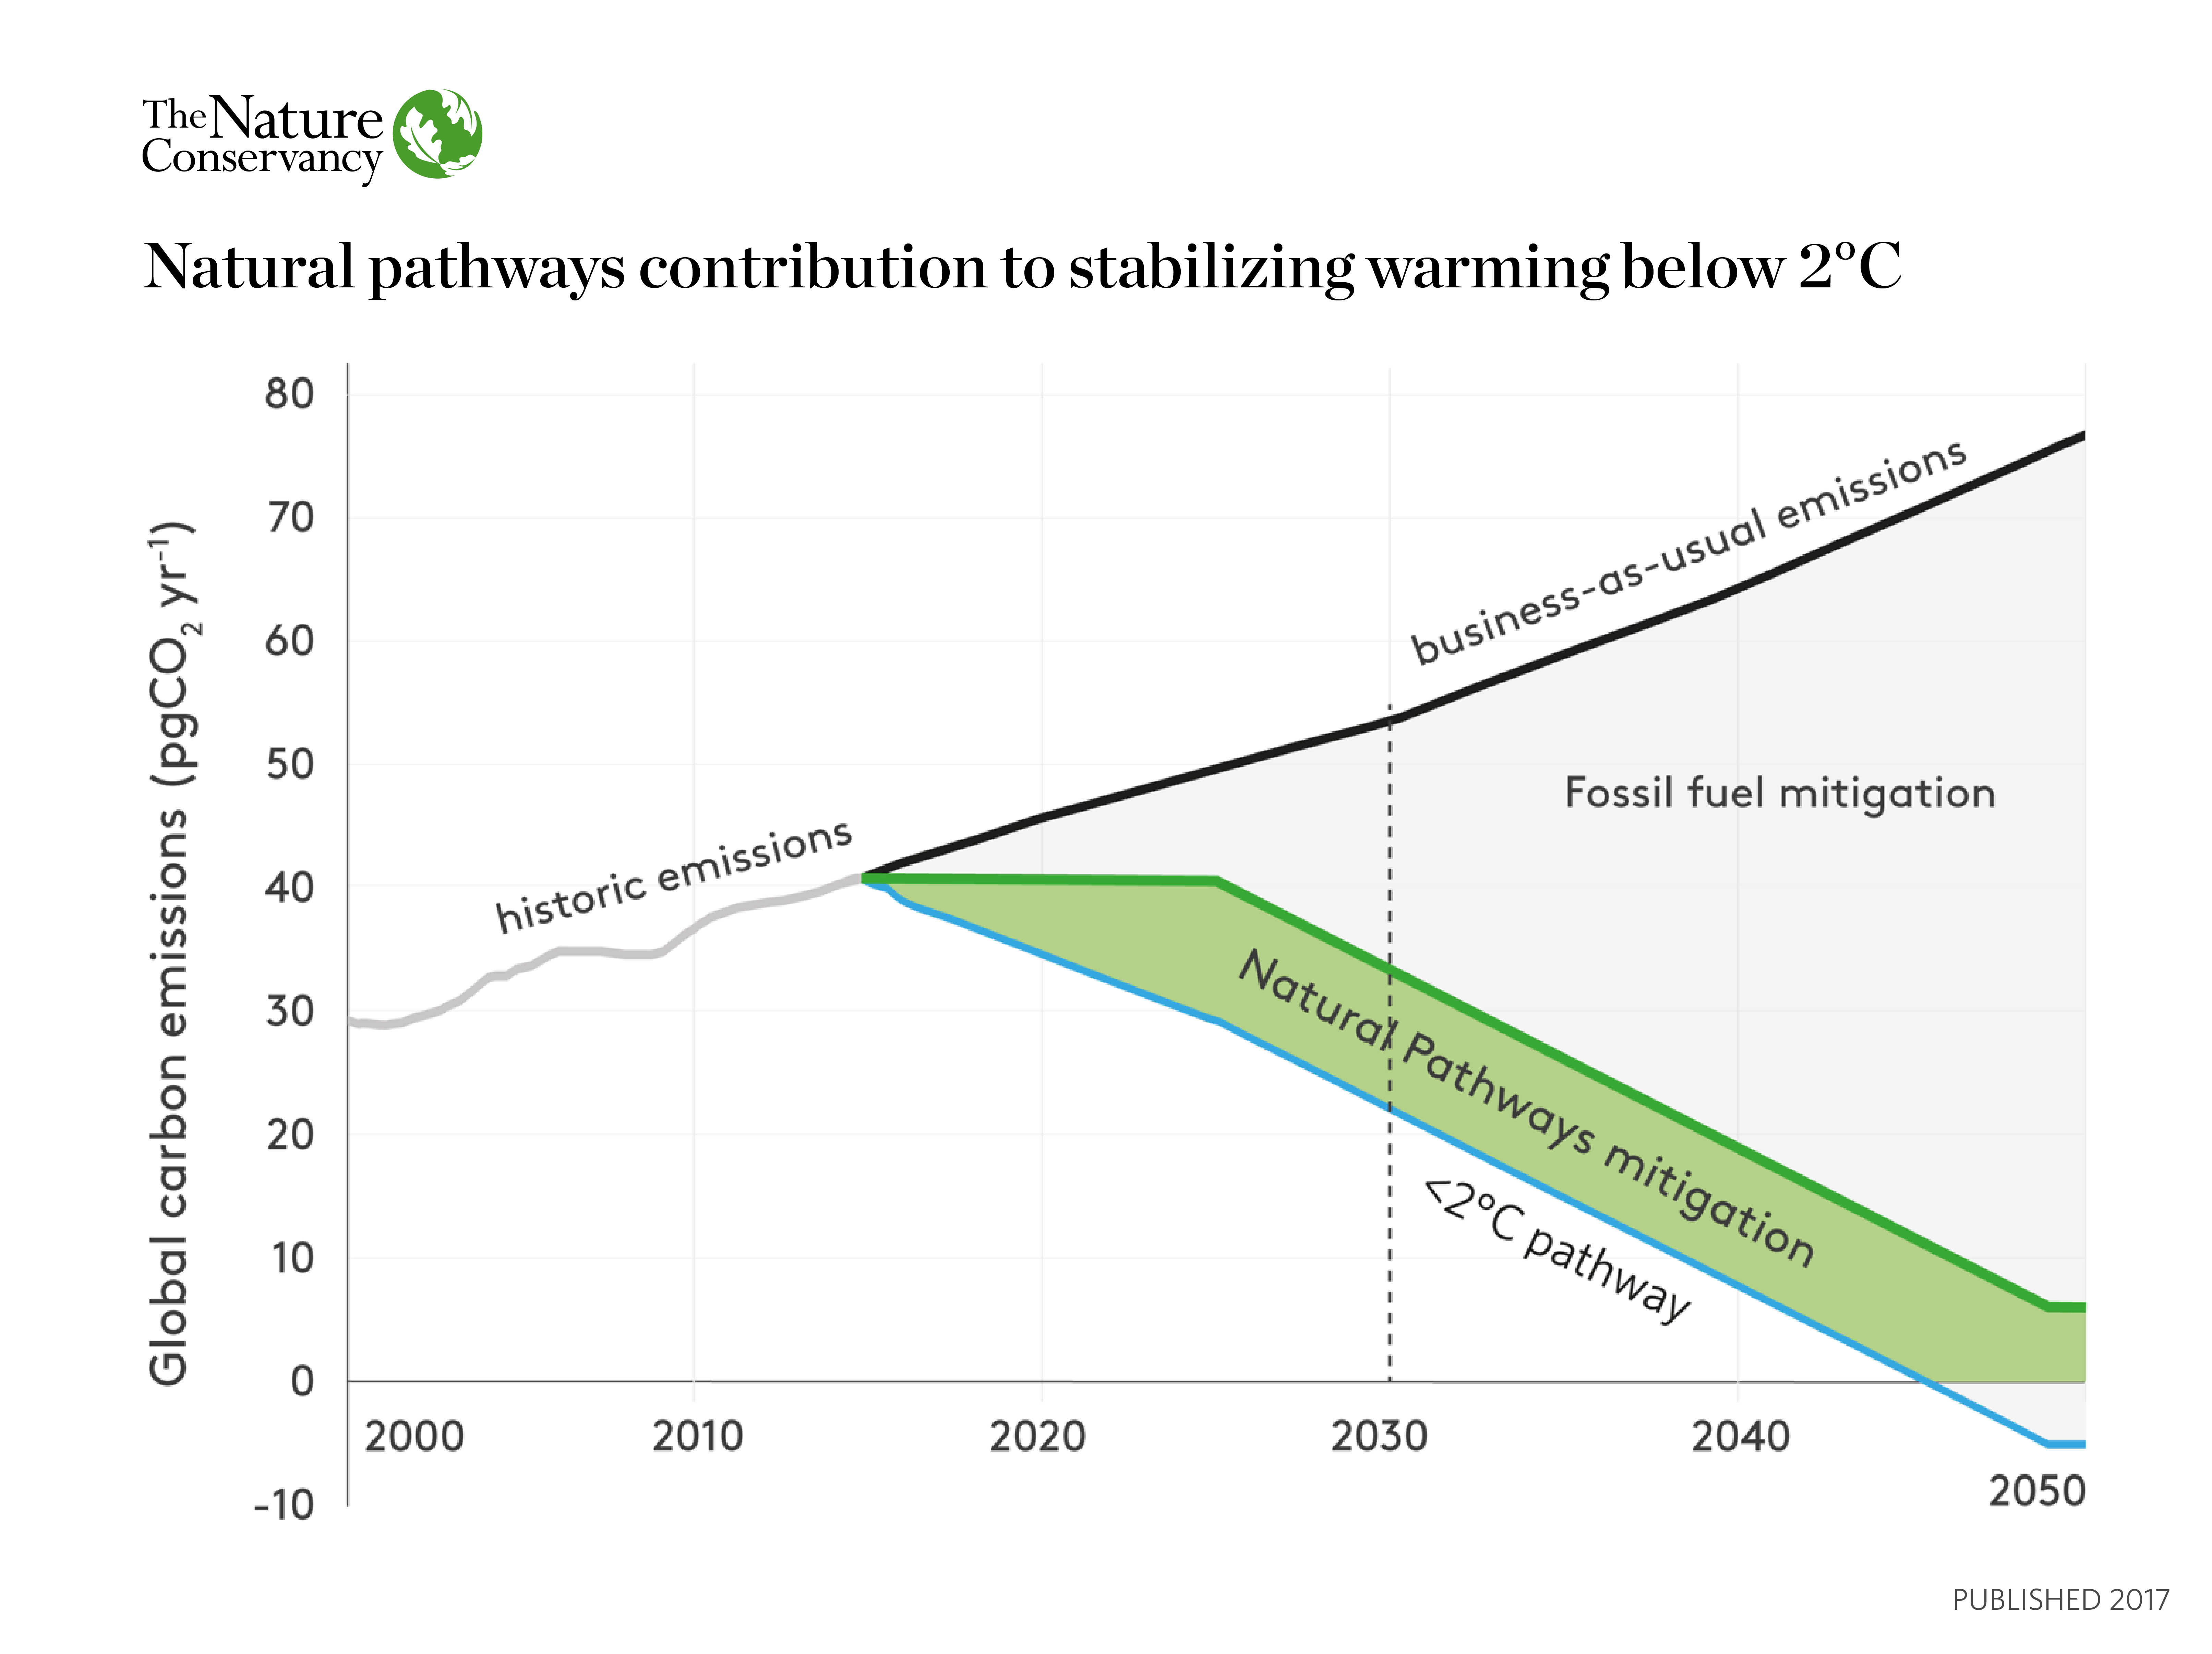 Natural pathways contribution to stabilizing warming below 2ºC / Credit: The Nature Conservancy